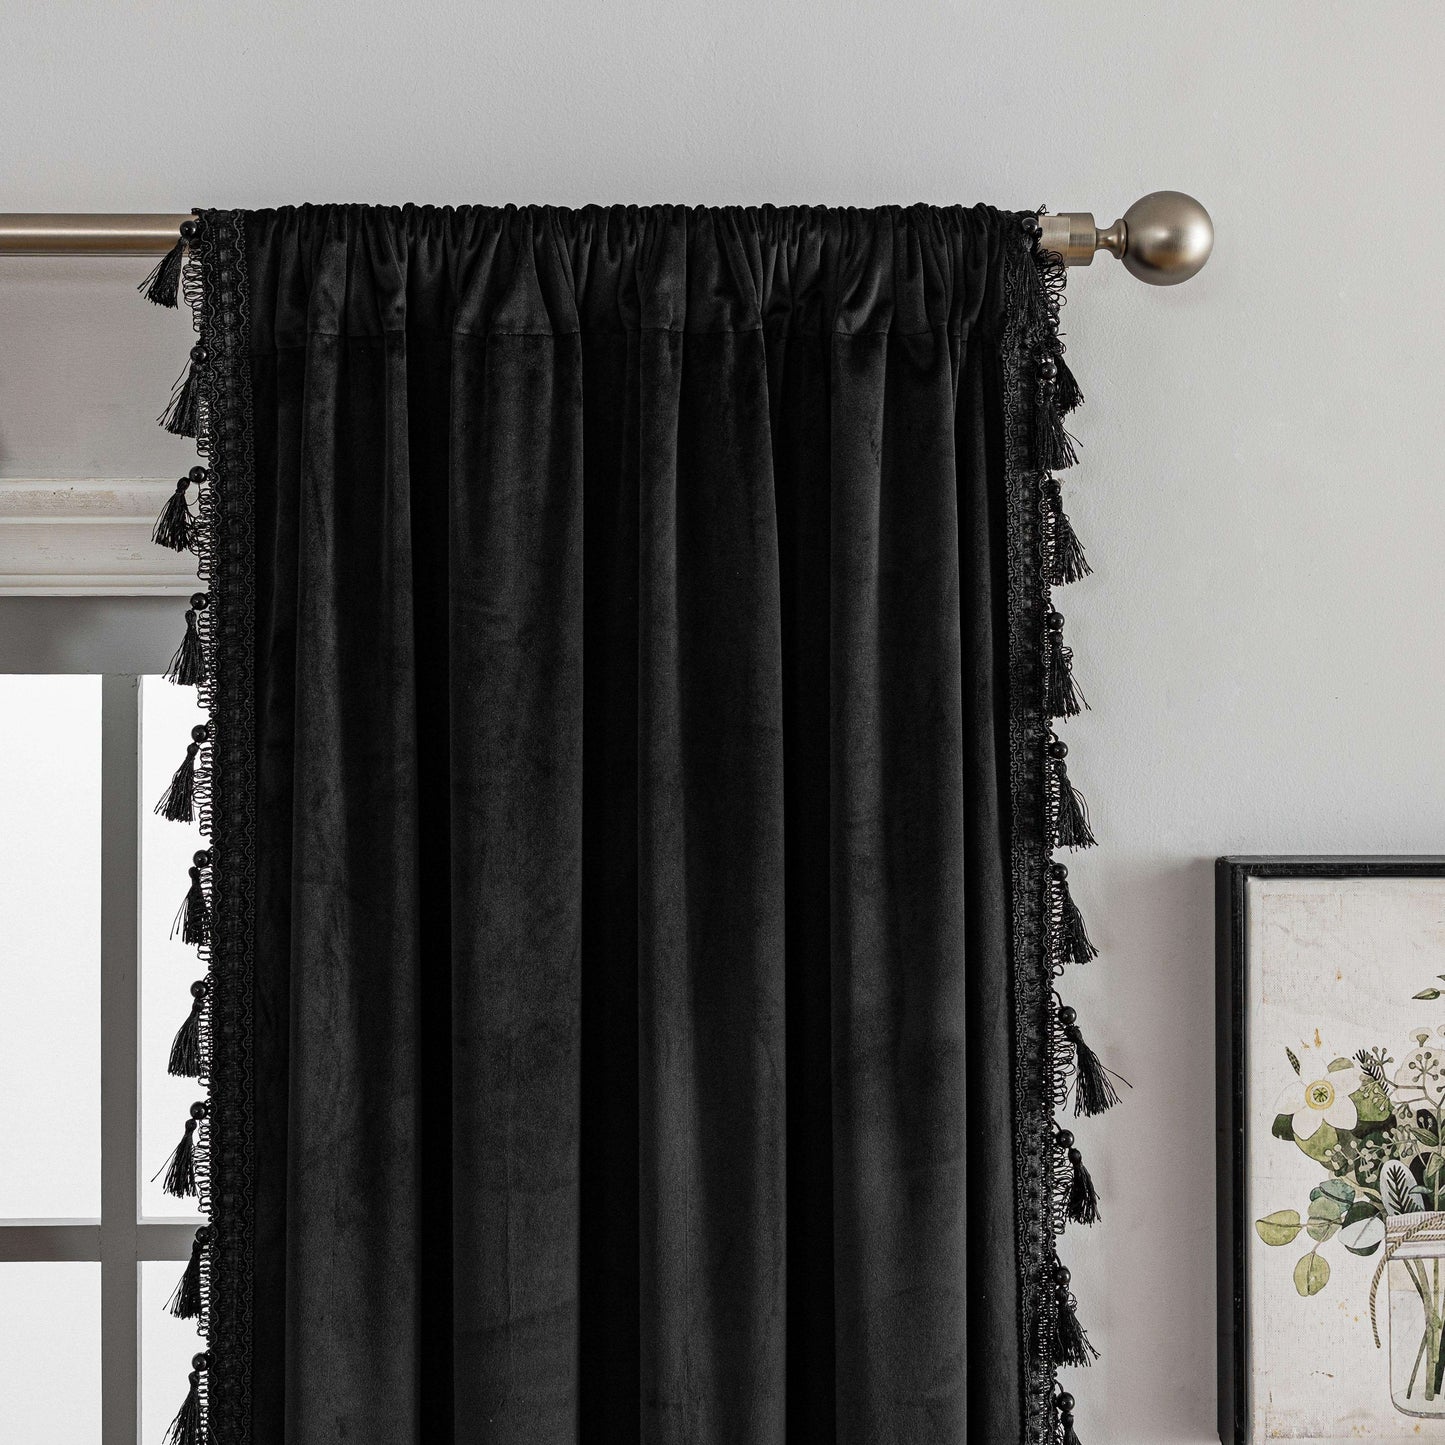 2 Panels Tassel Velvet Curtains, Bedroom Balcony Blackout Curtain, Windproof Tassels Curtains Fashionable For Living Room Office Home Decor